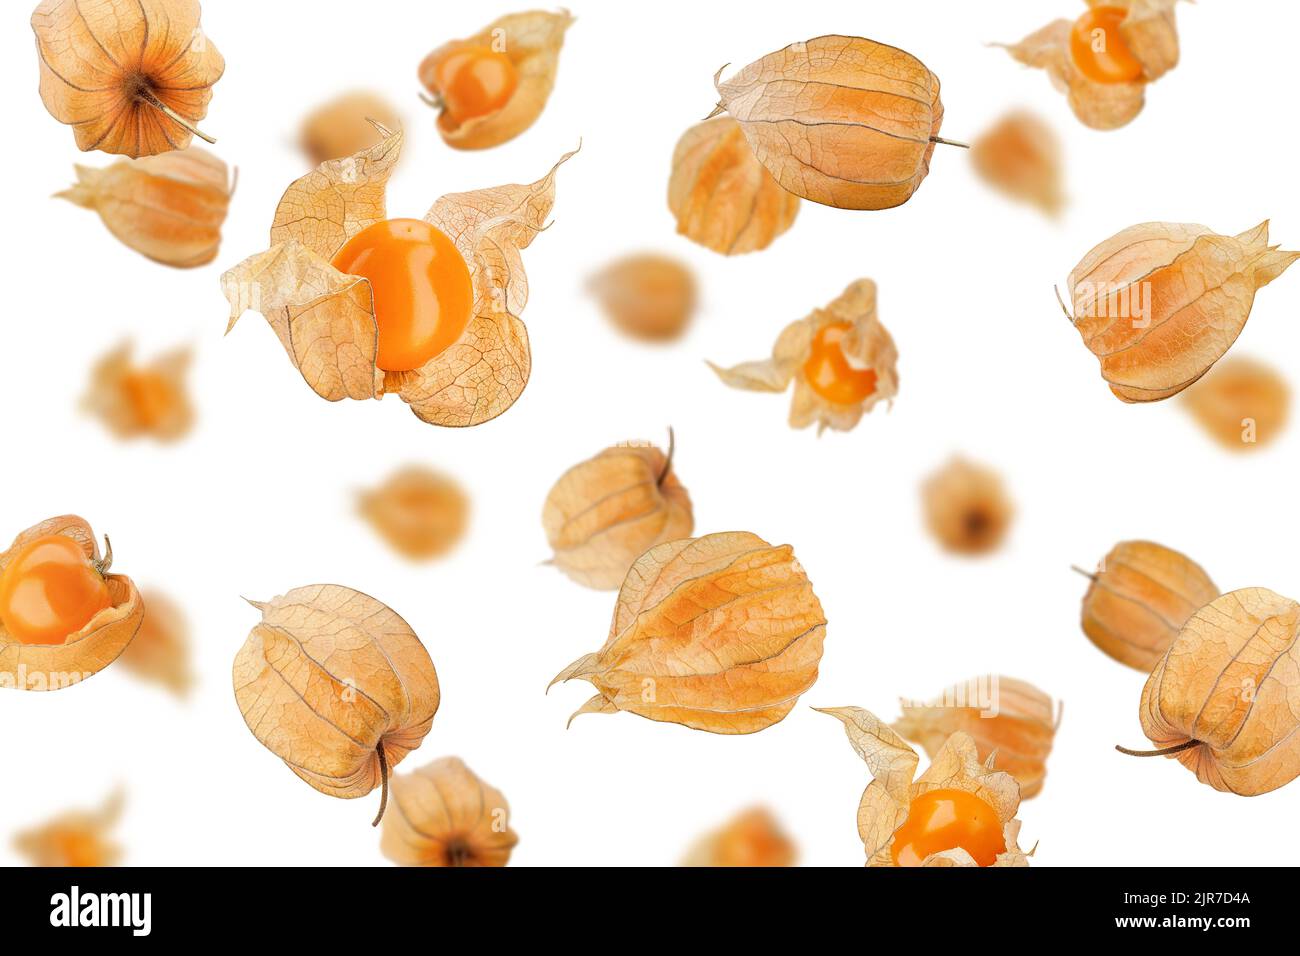 Falling Cape gooseberry, physalis isolated on white background, selective focus Stock Photo